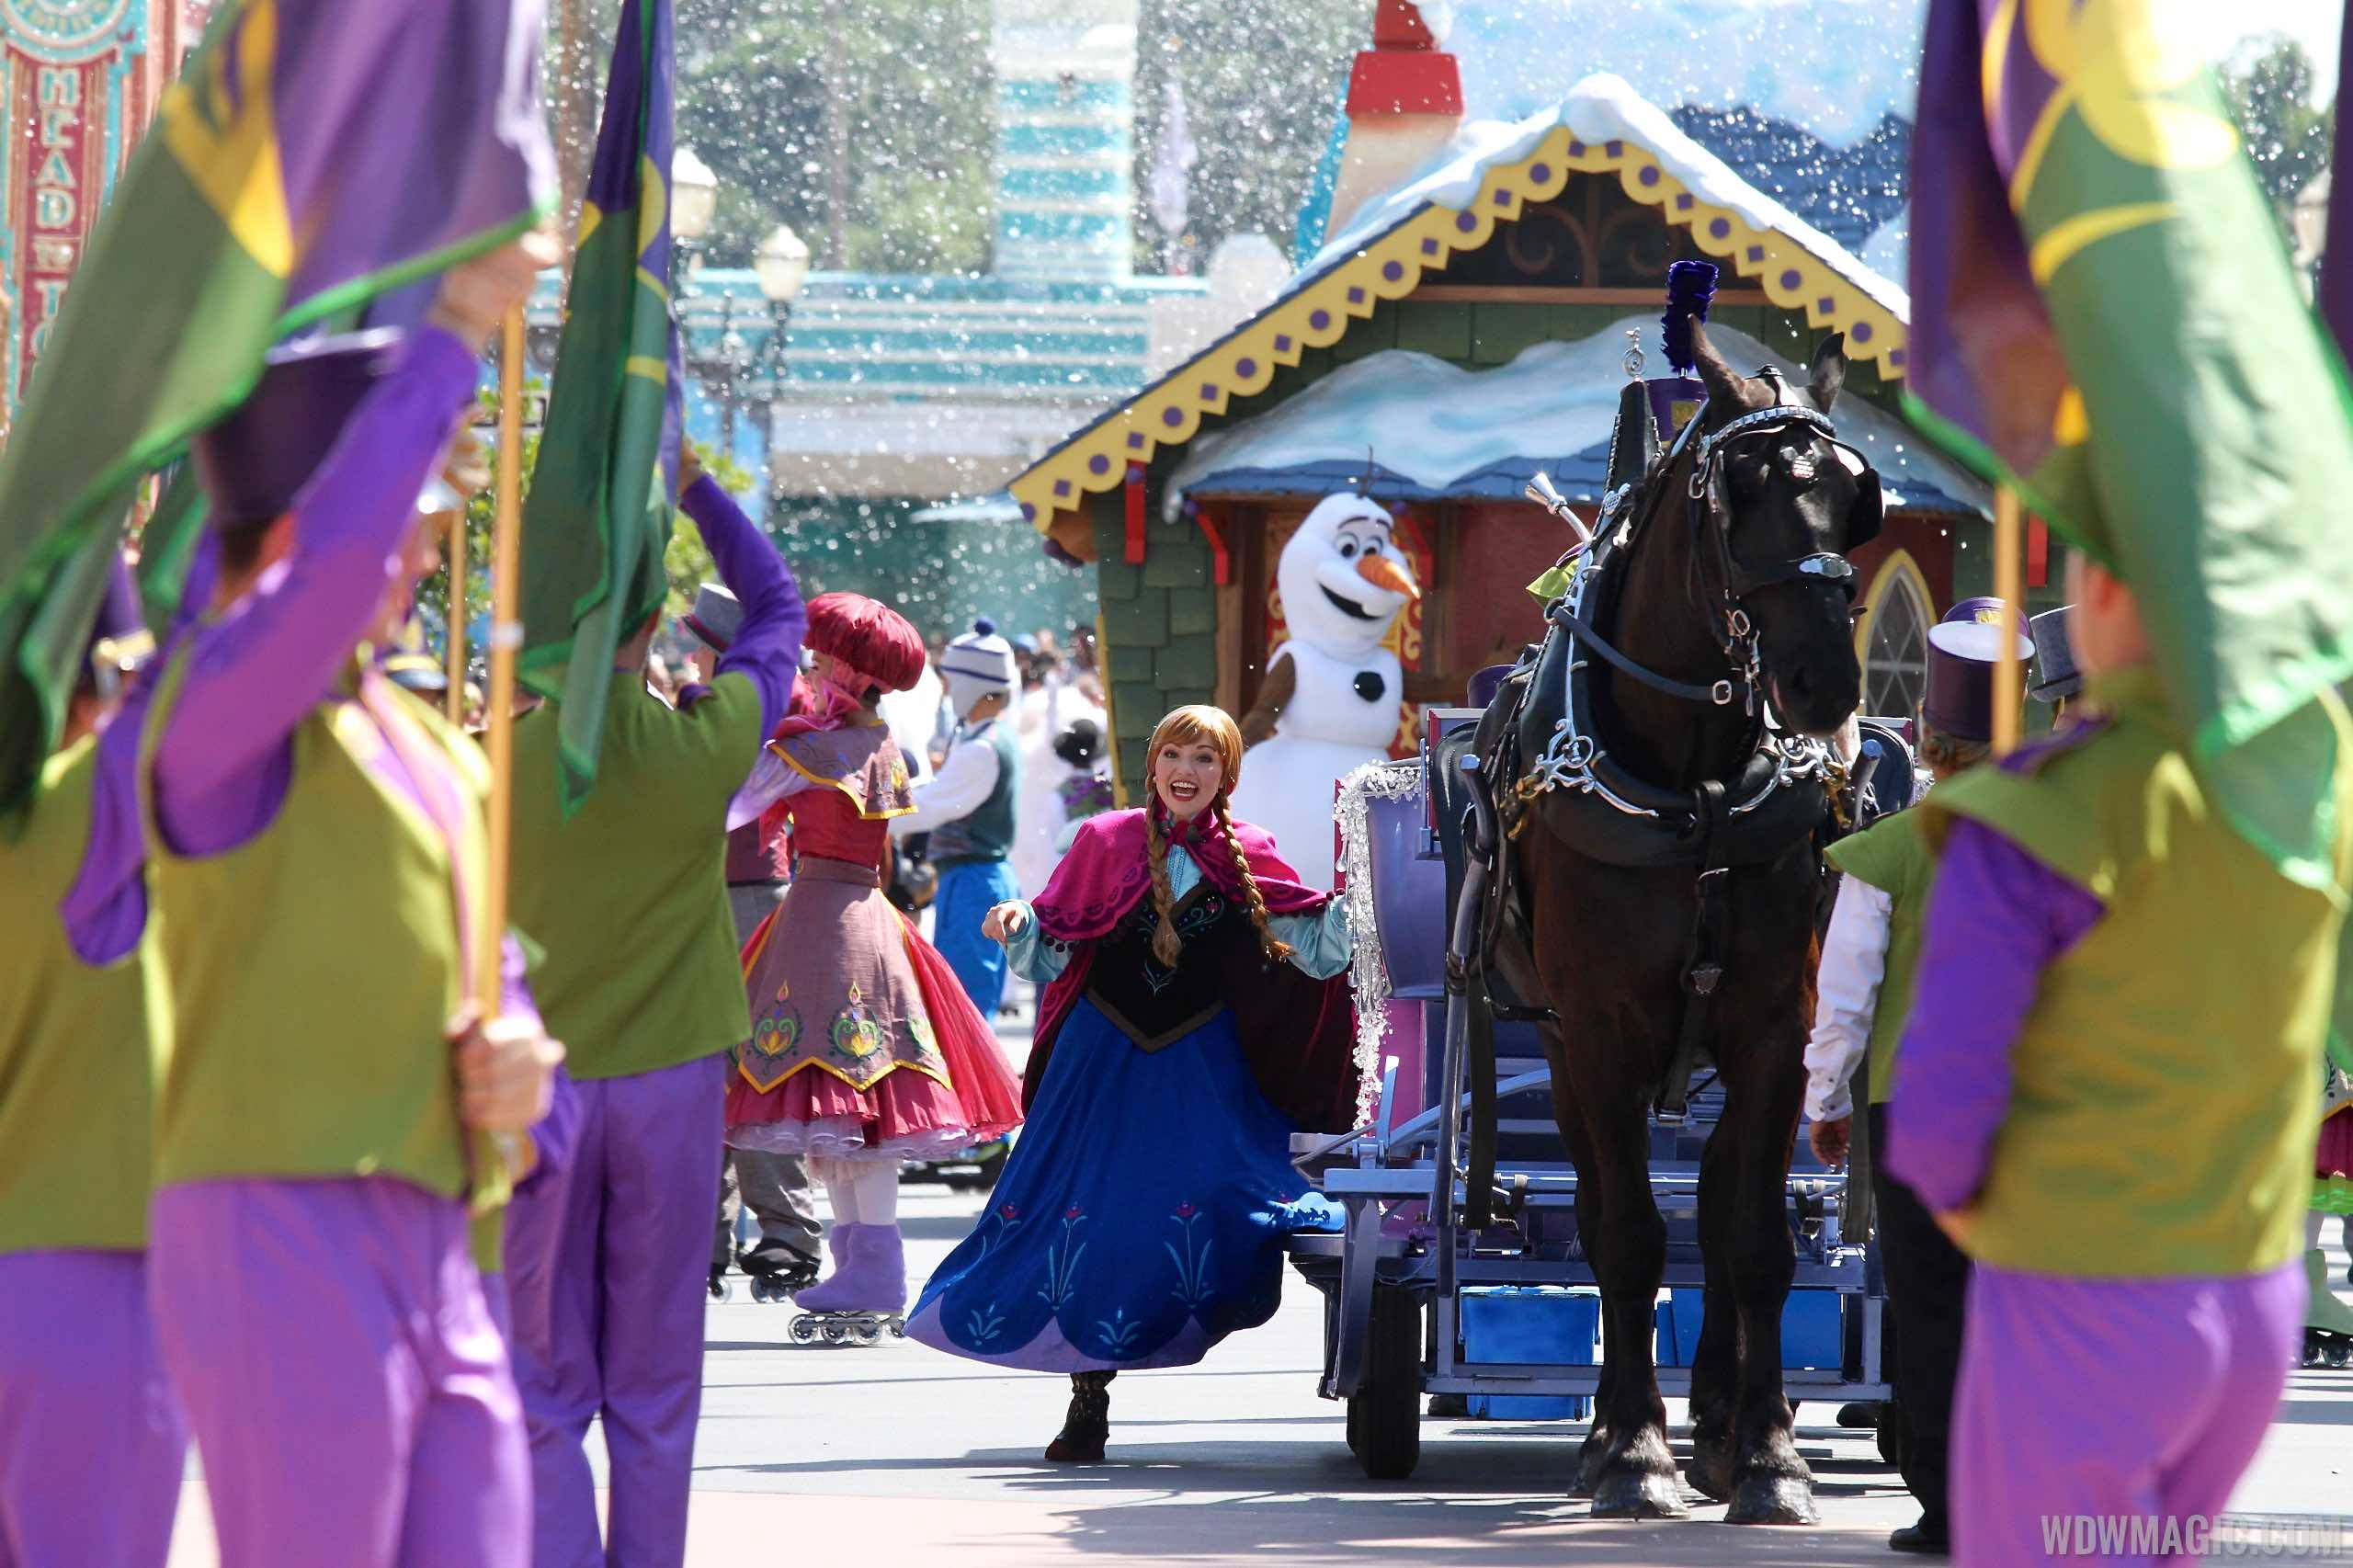 VIDEO - Frozen Summer Fun kicks off with a new version of the Frozen Royal Welcome